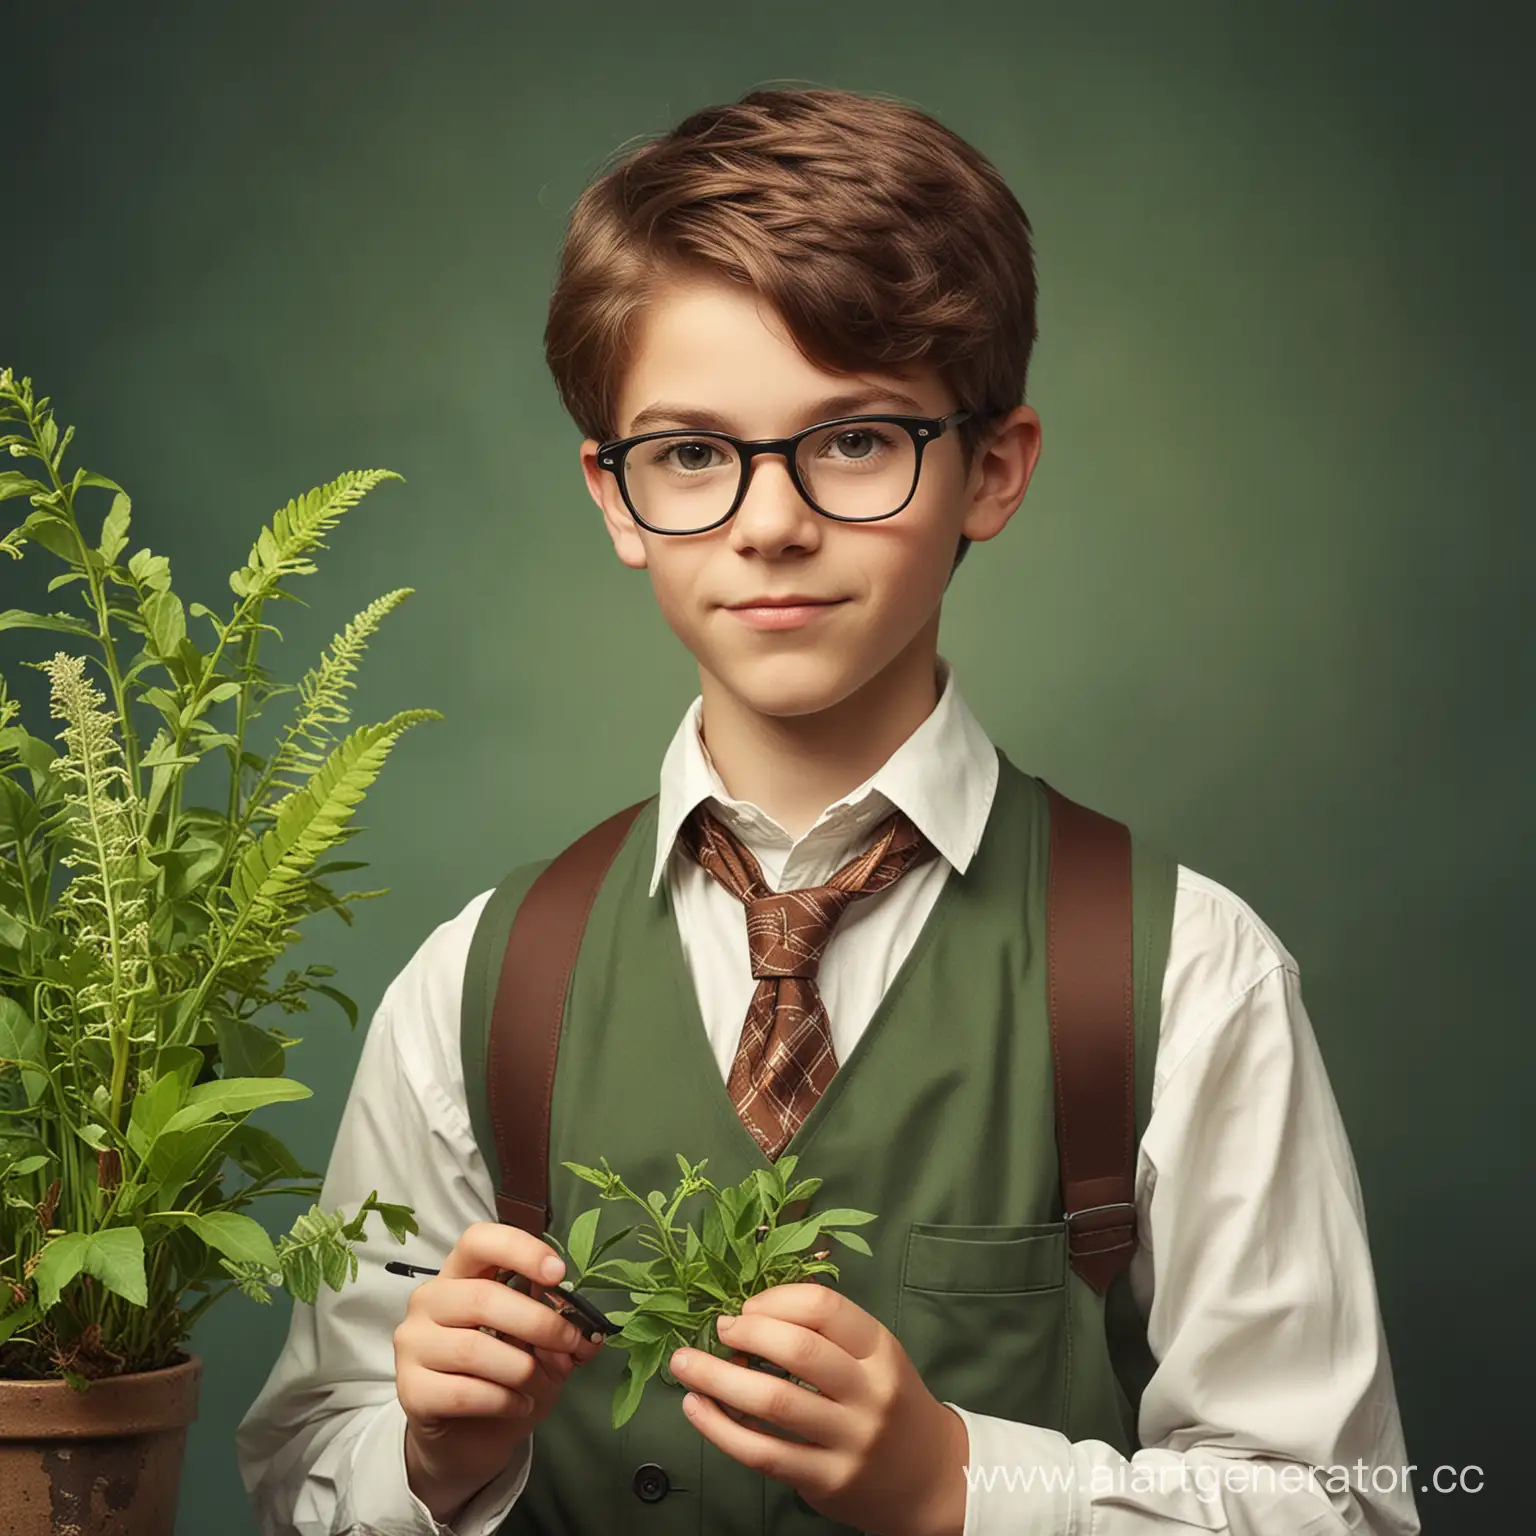 Young-Botanist-Discovering-Rare-Plants-in-Lush-Garden